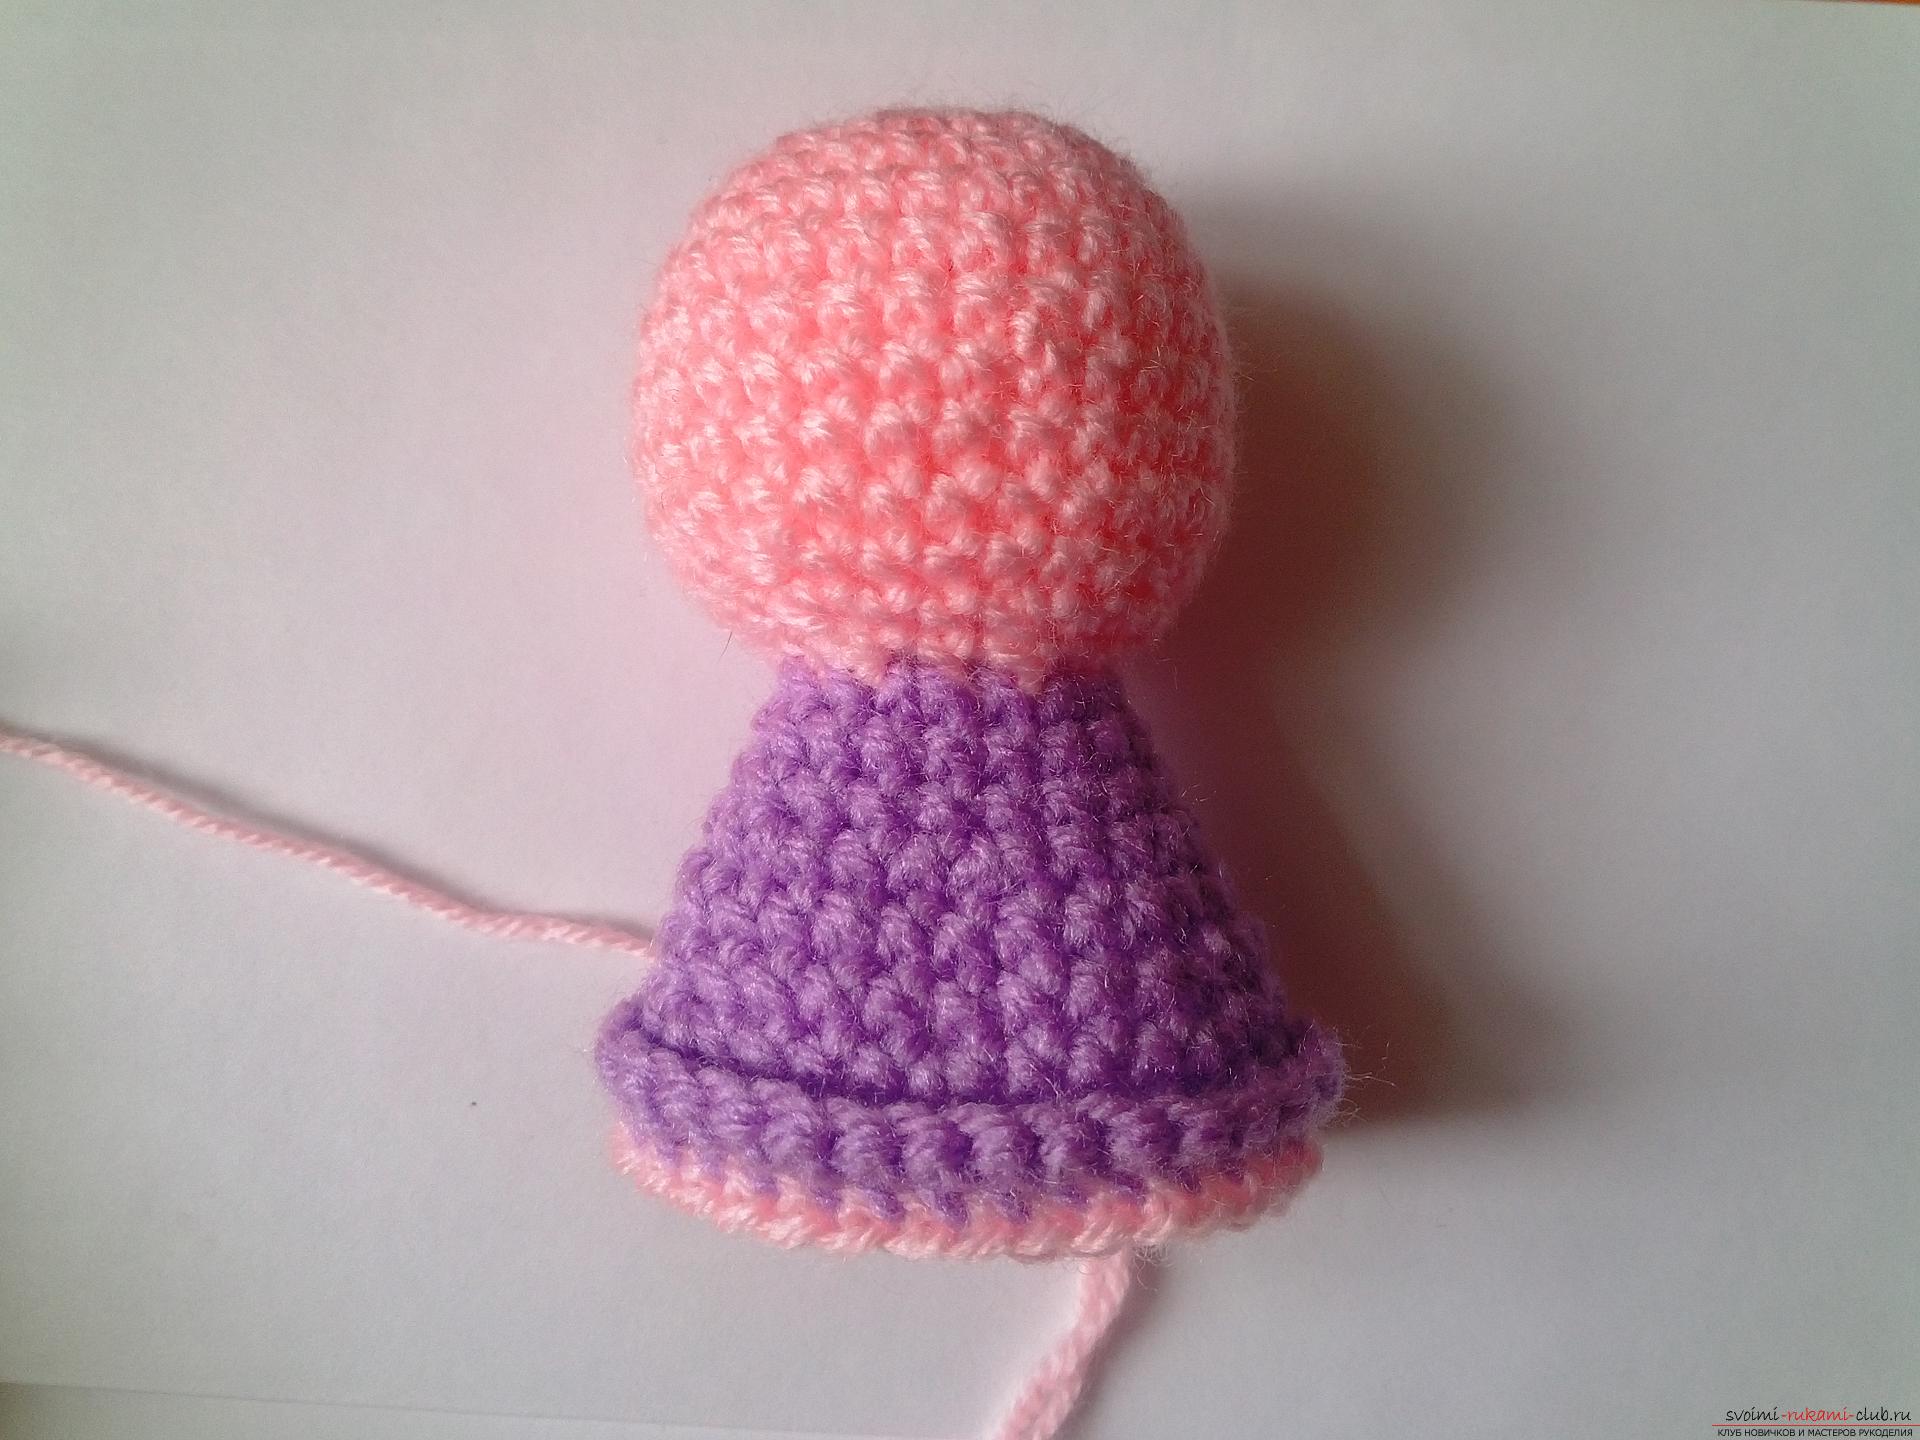 A master class with a photo and a step-by-step description will teach how to tie an amigurumi crochet toy. Picture №3